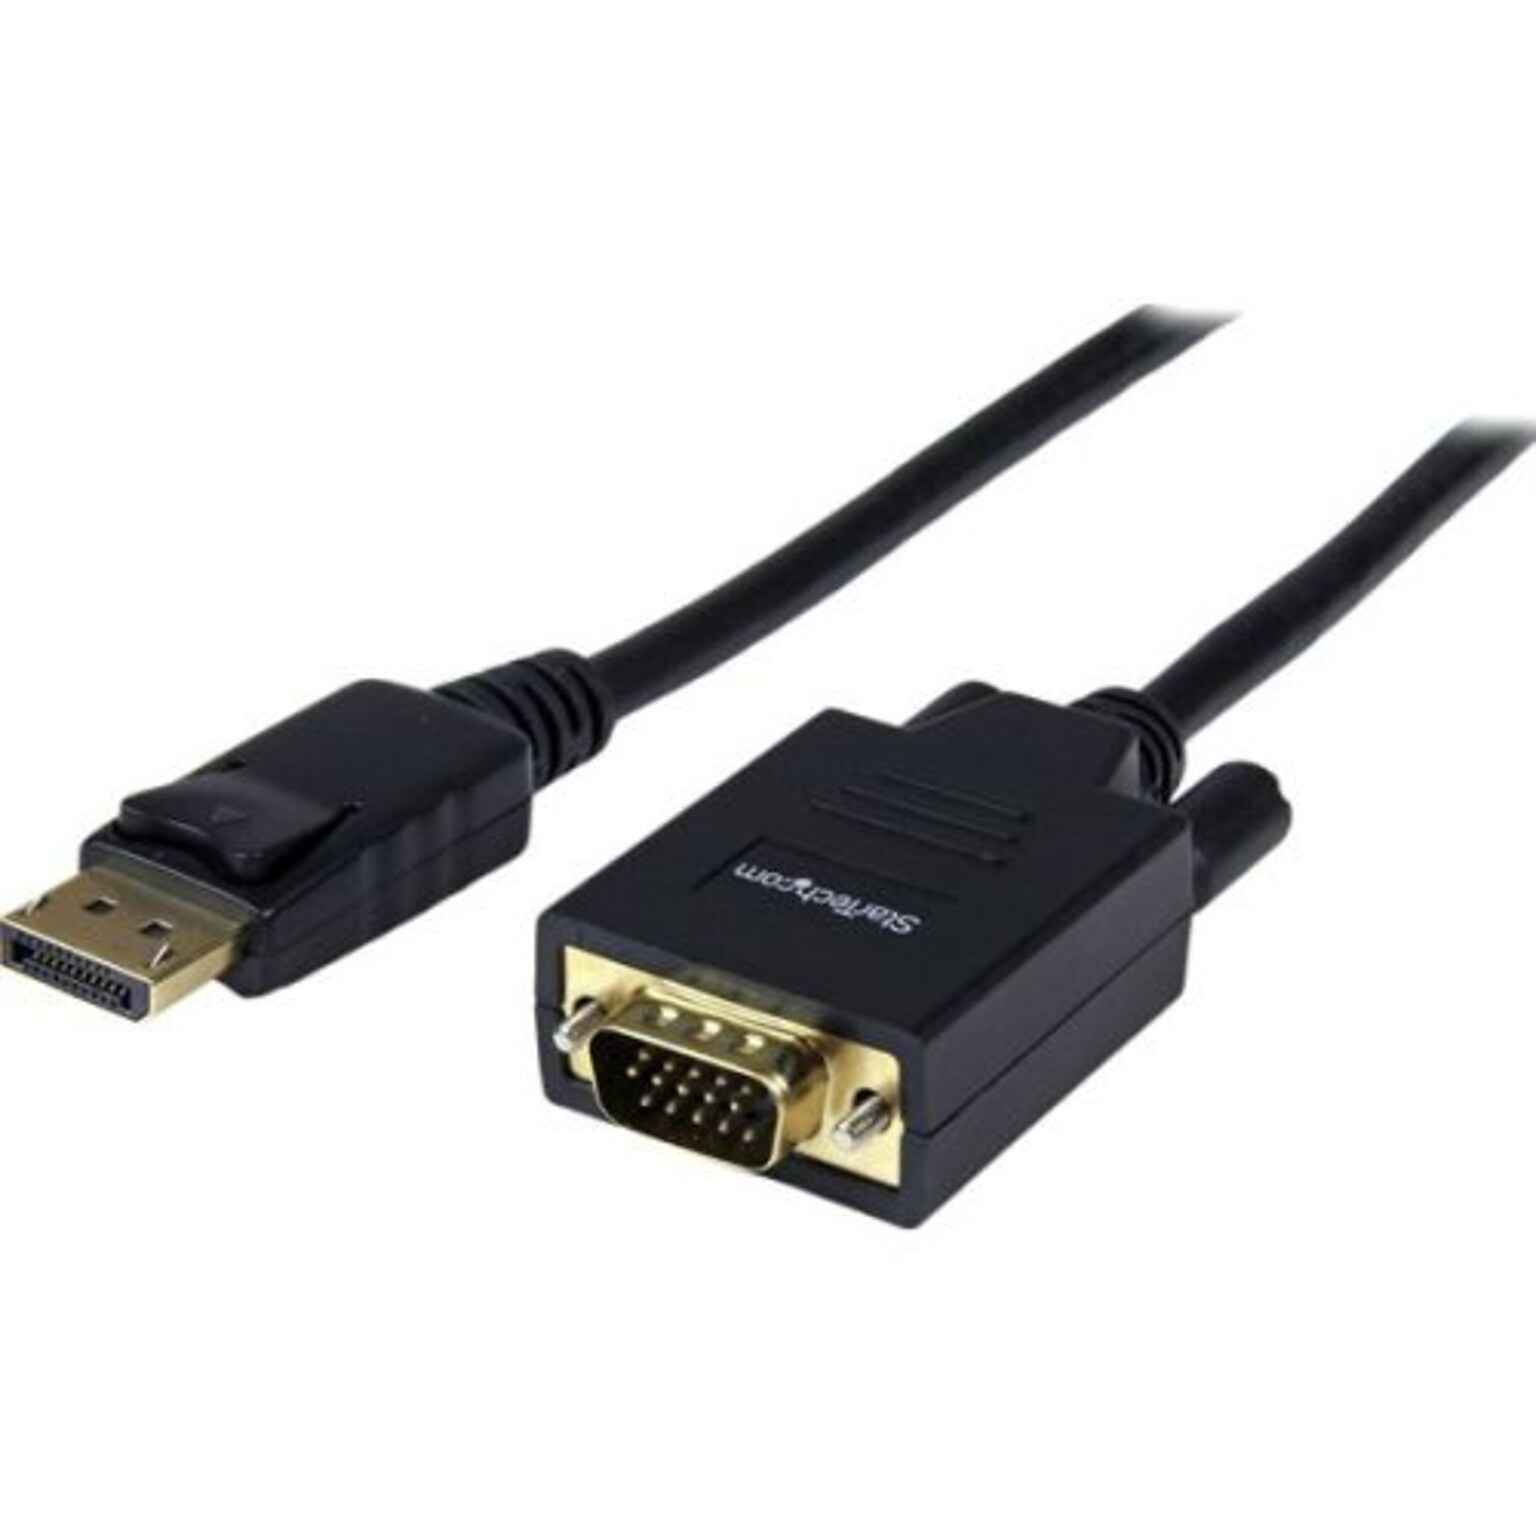 Startech 6 DisplayPort to VGA Adapter Converter Cable; Black